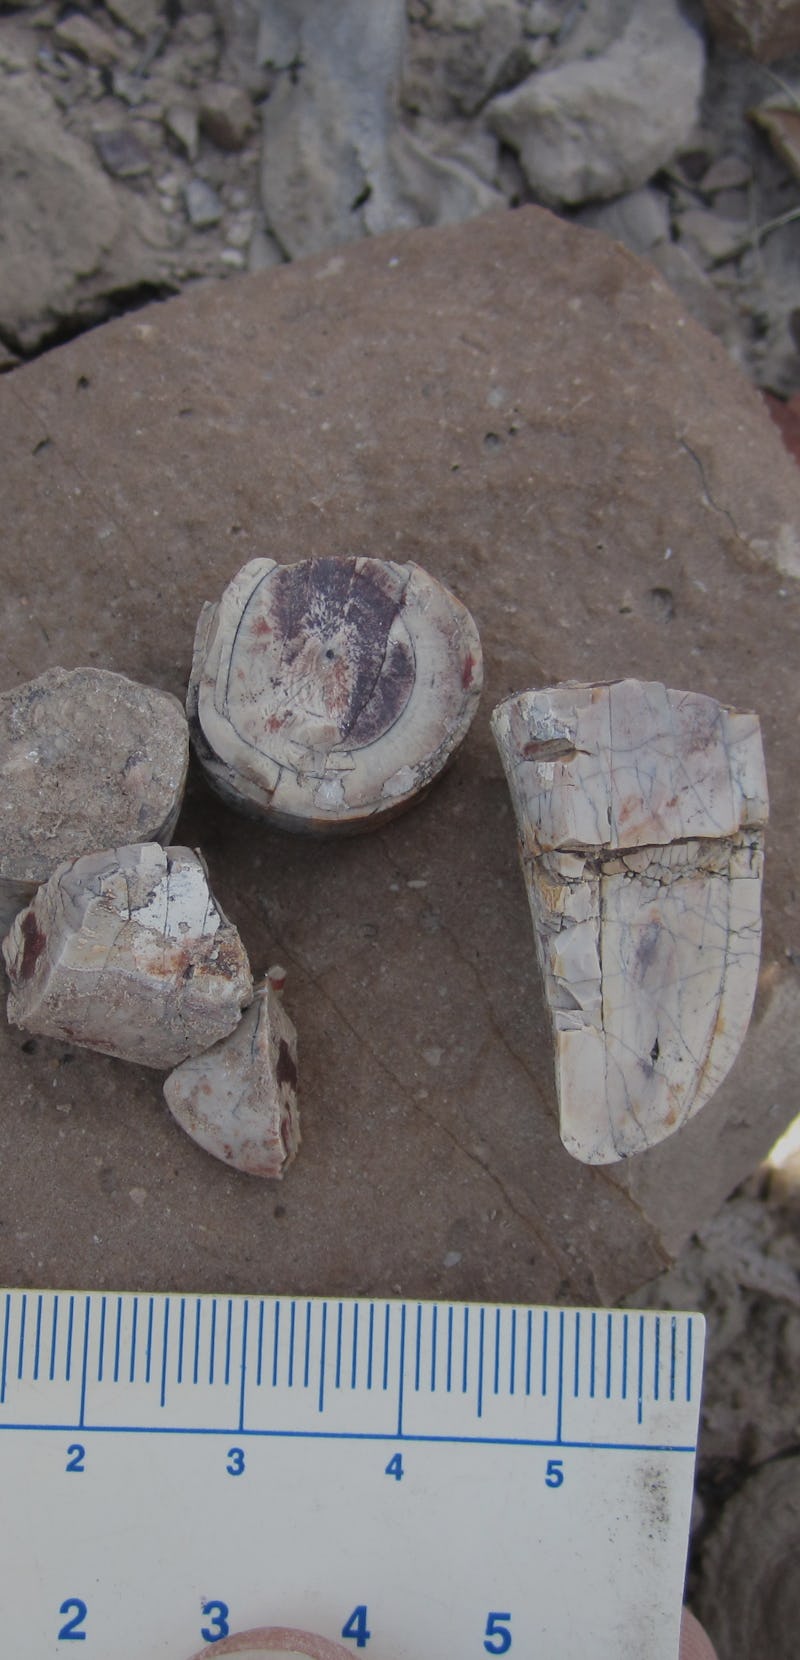 Isolated tusk fragments found in Zambia by field teams in 2018.